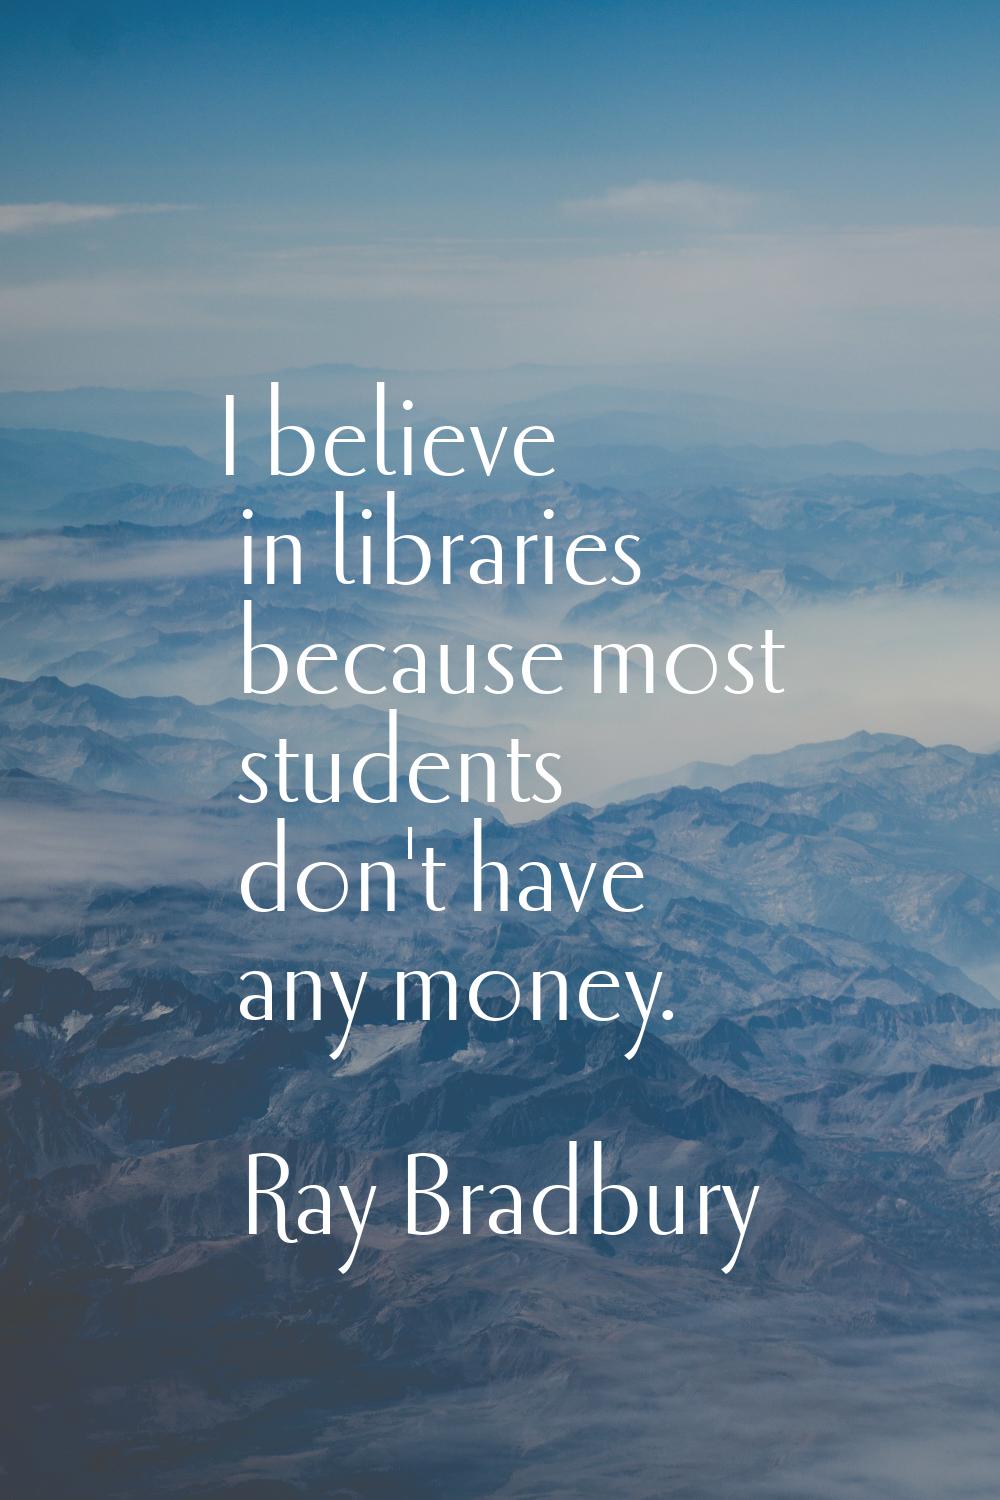 I believe in libraries because most students don't have any money.